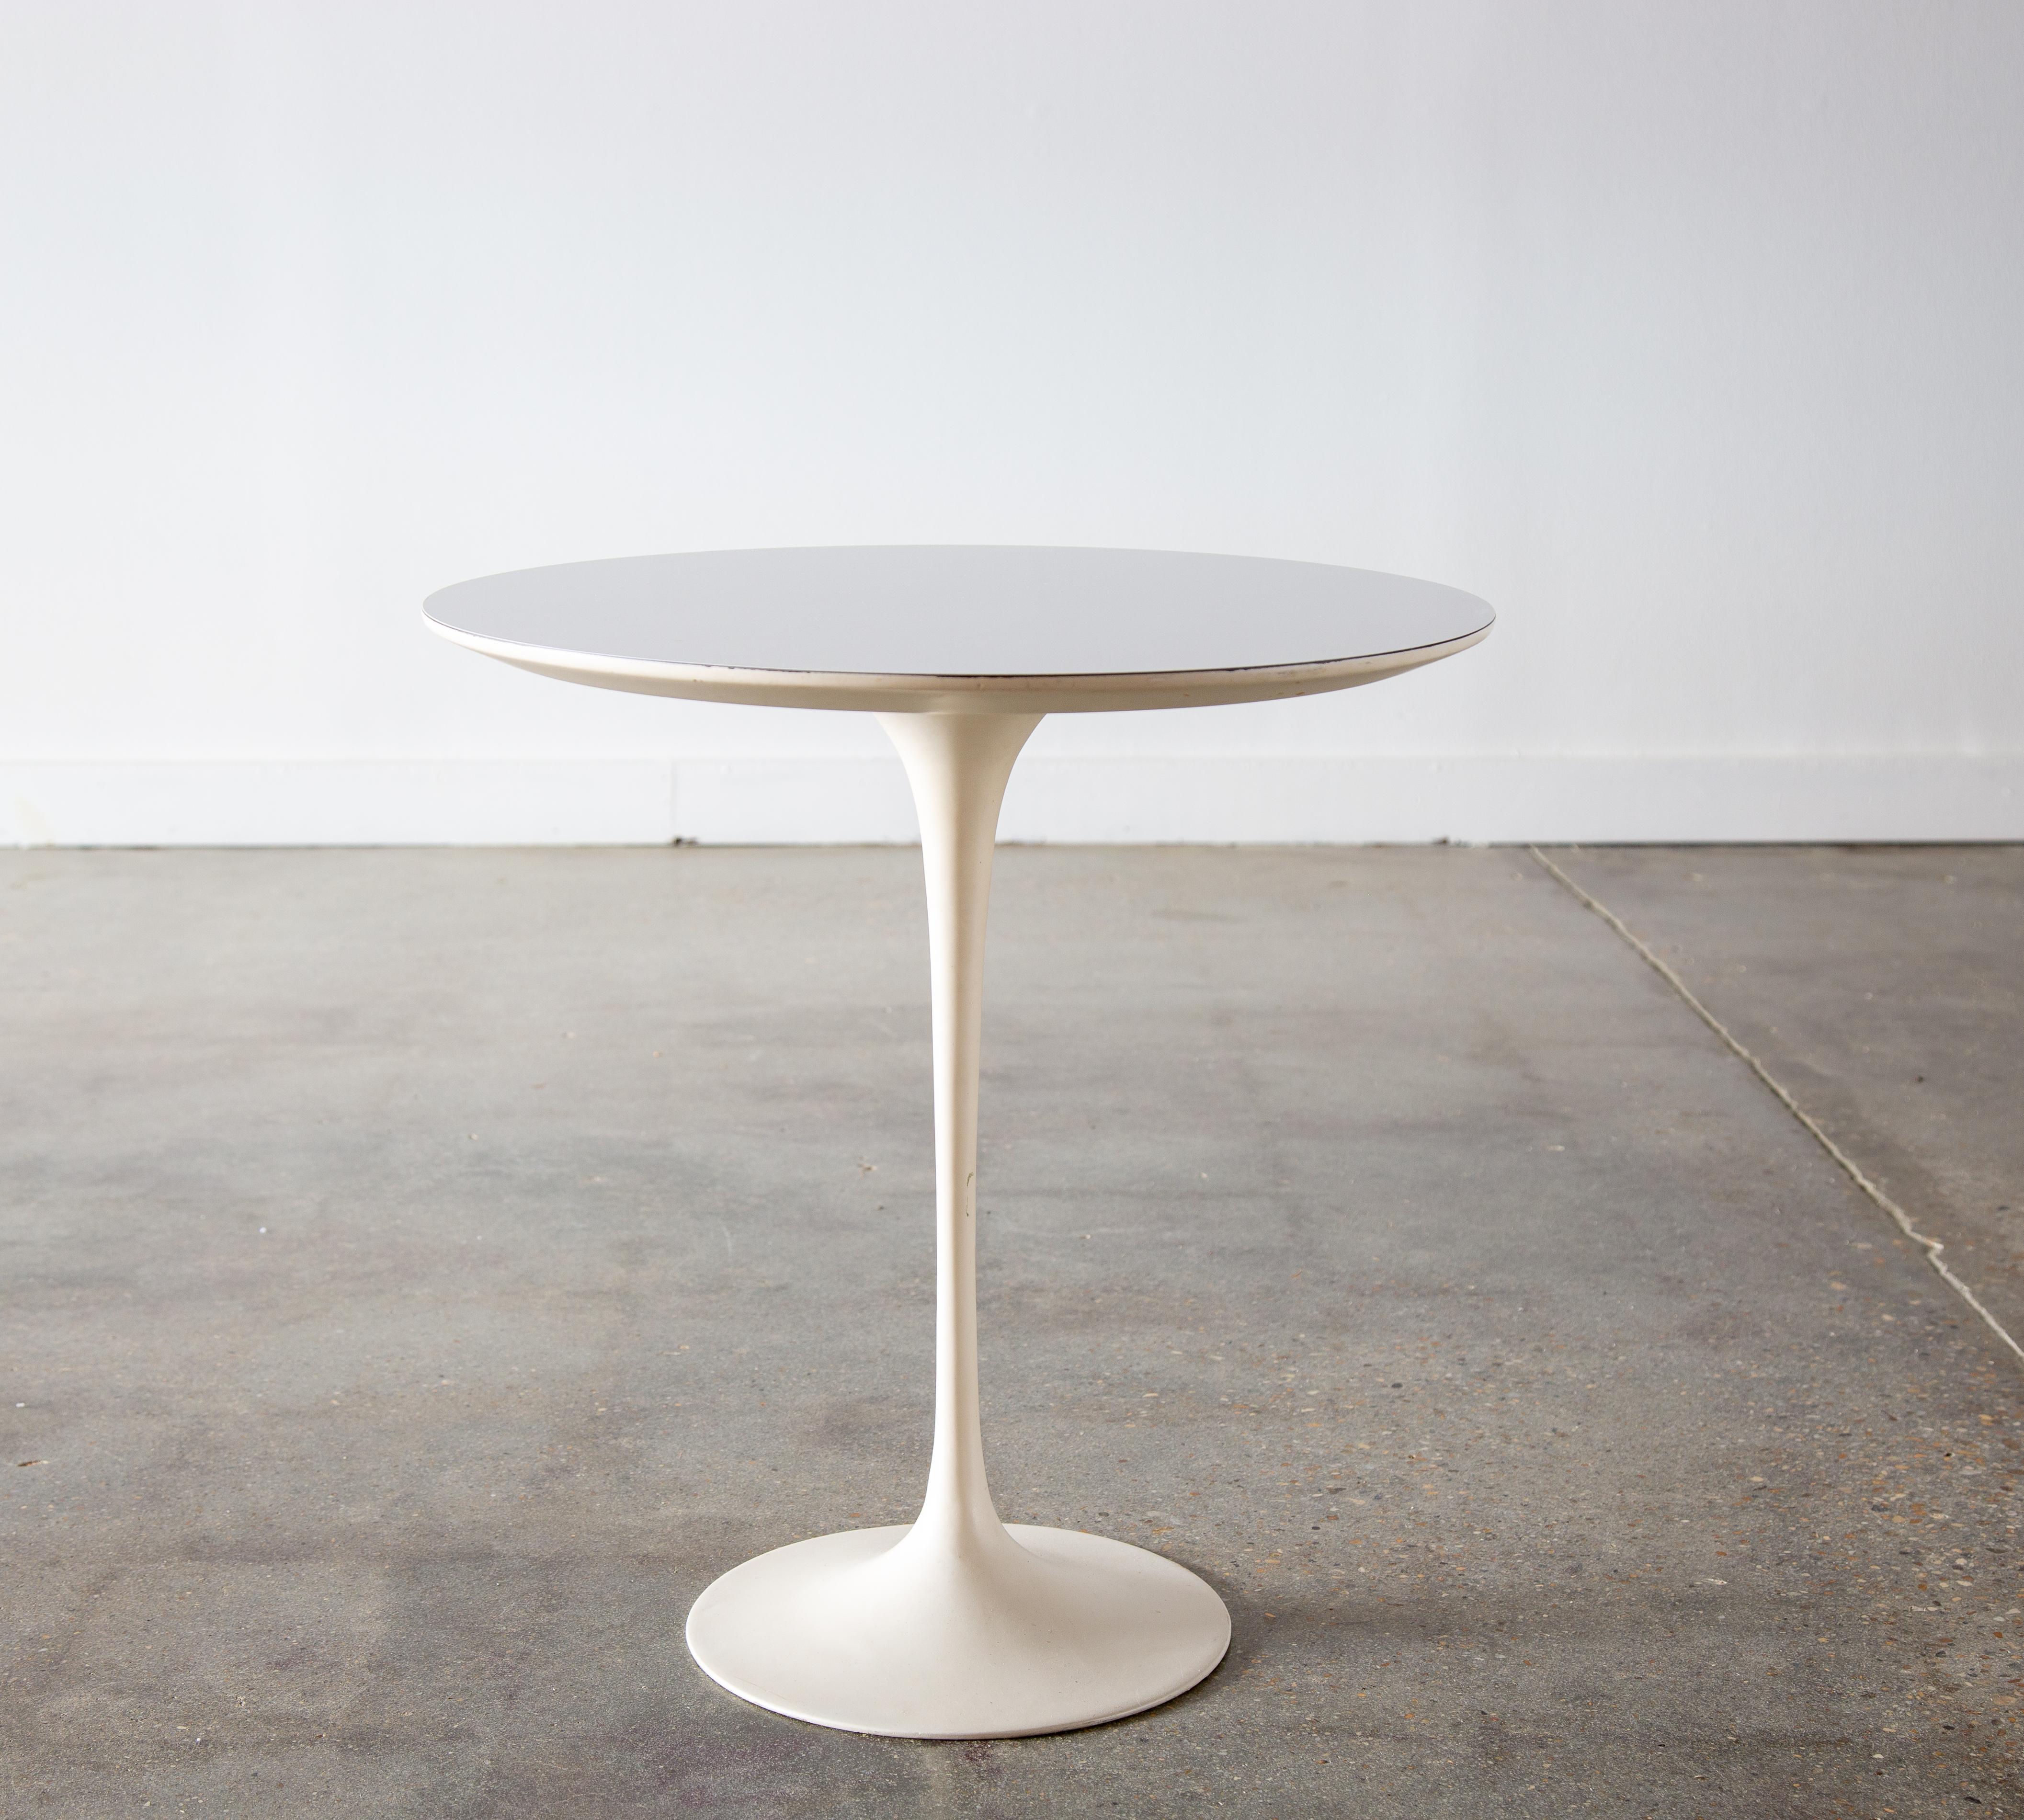 A 1970s 20” white laminate top tulip table designed by Eero Saarinen for Knoll International.  This example retains its original label. Weighted base. A true classic. 

Dimensions:

20” High x 20” Diameter

Condition: 

Very good vintage condition.